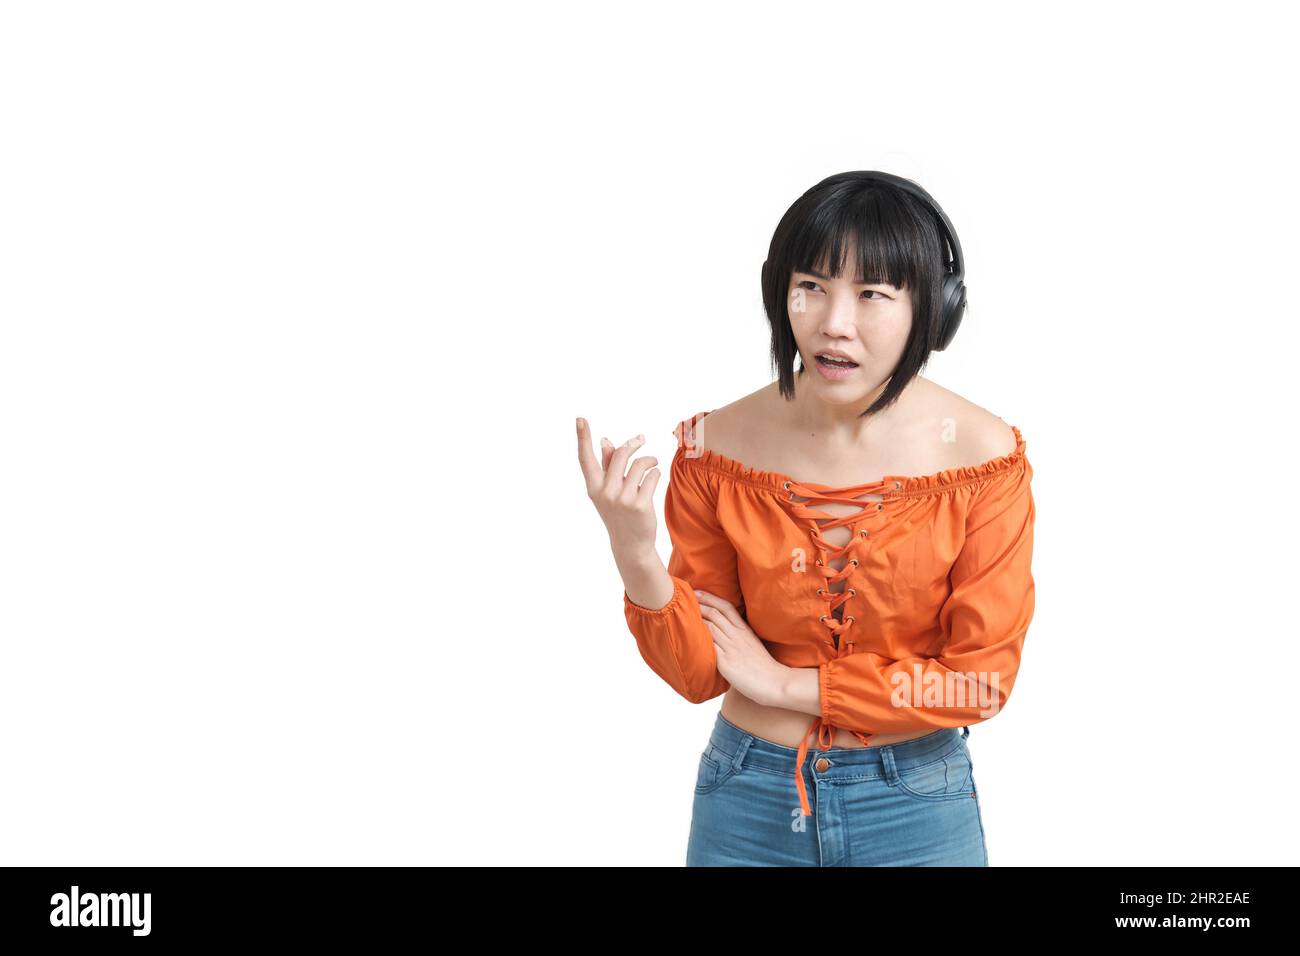 Young asian woman with headphones pointing at something surprised, isolated. Stock Photo